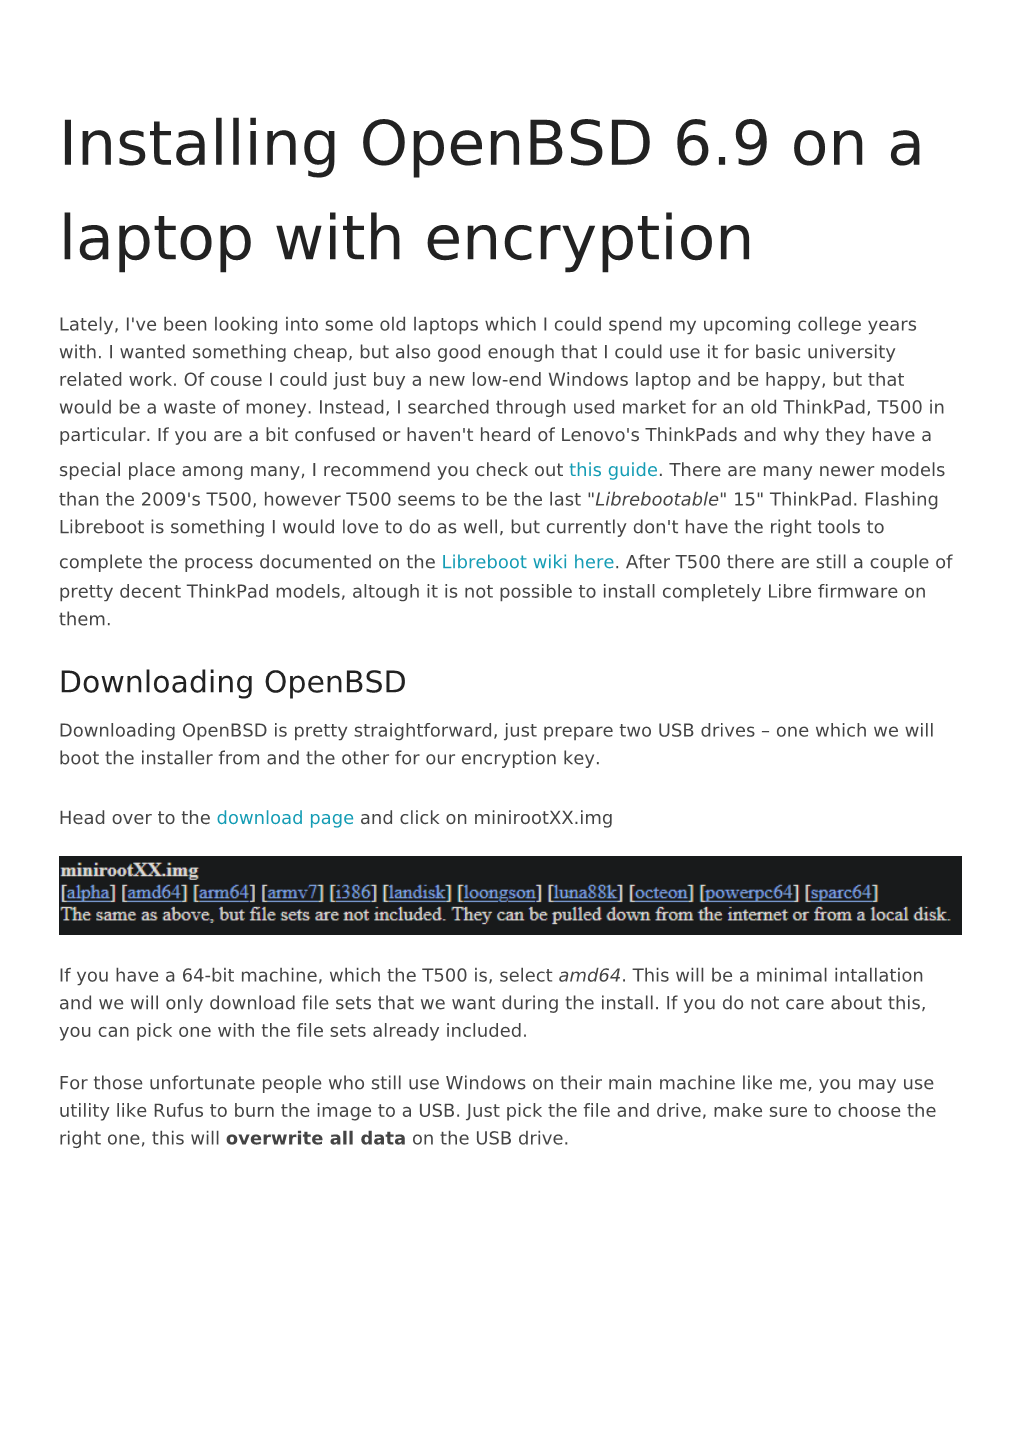 Installing Openbsd 6.9 on a Laptop with Encryption